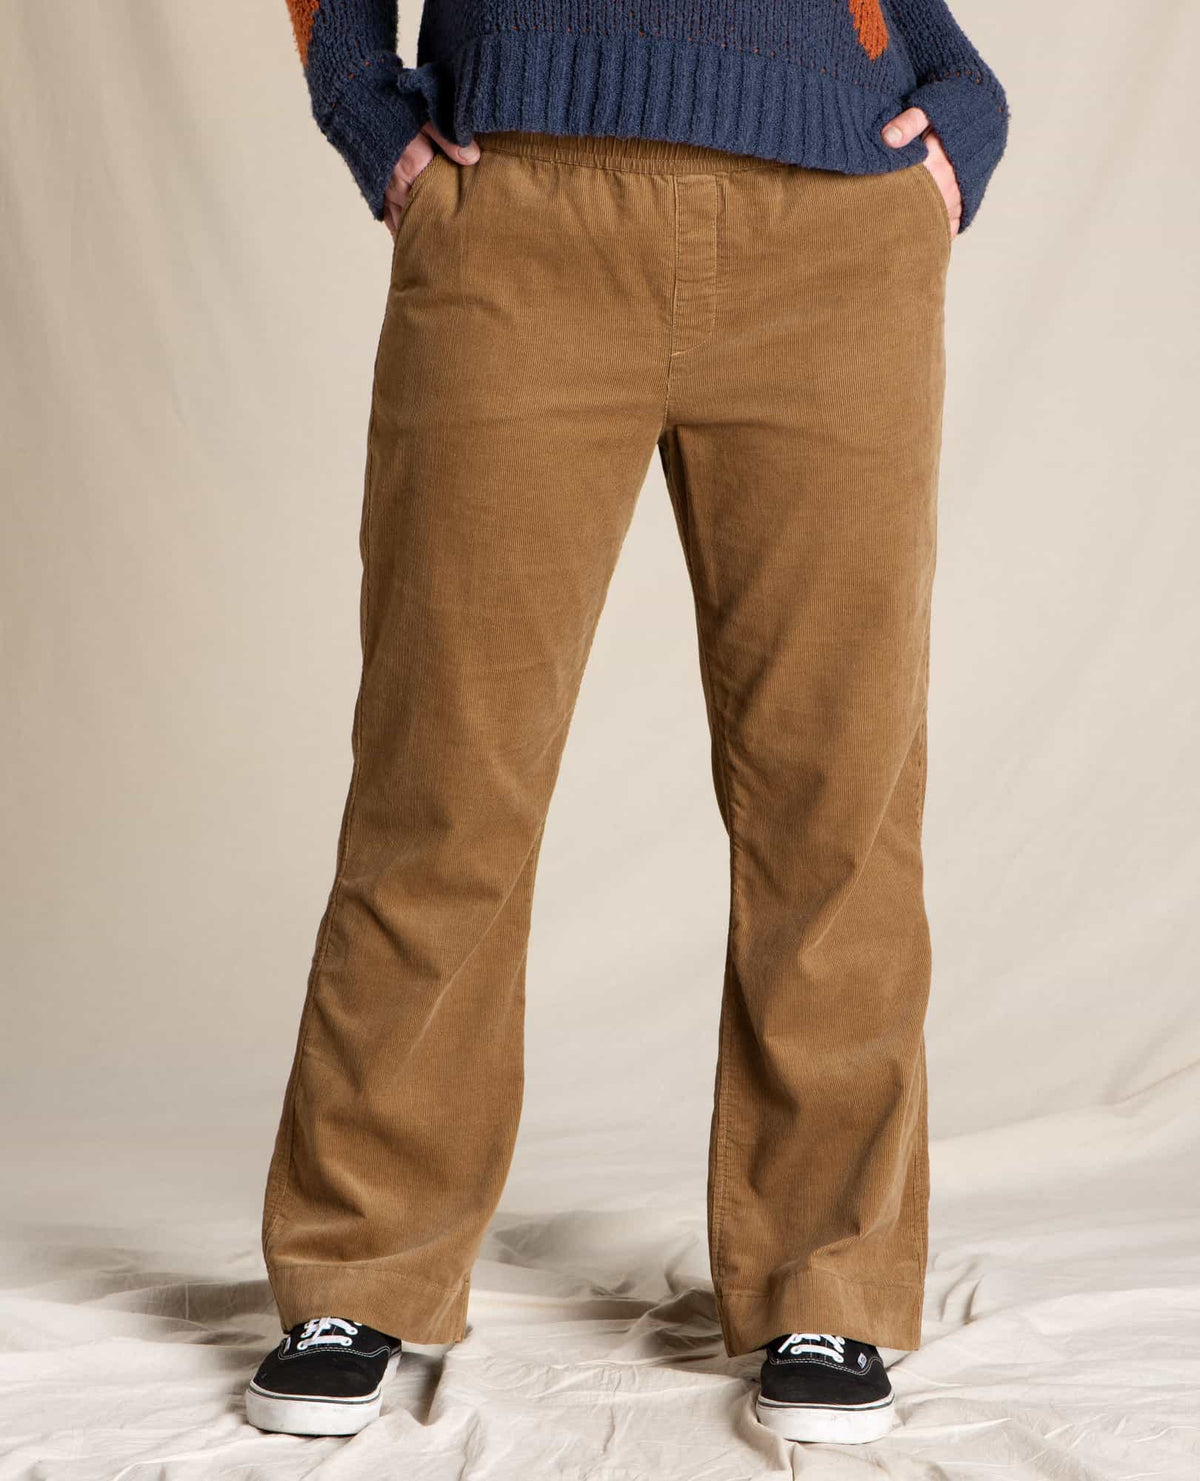 Scouter Cord Pull-On Pant